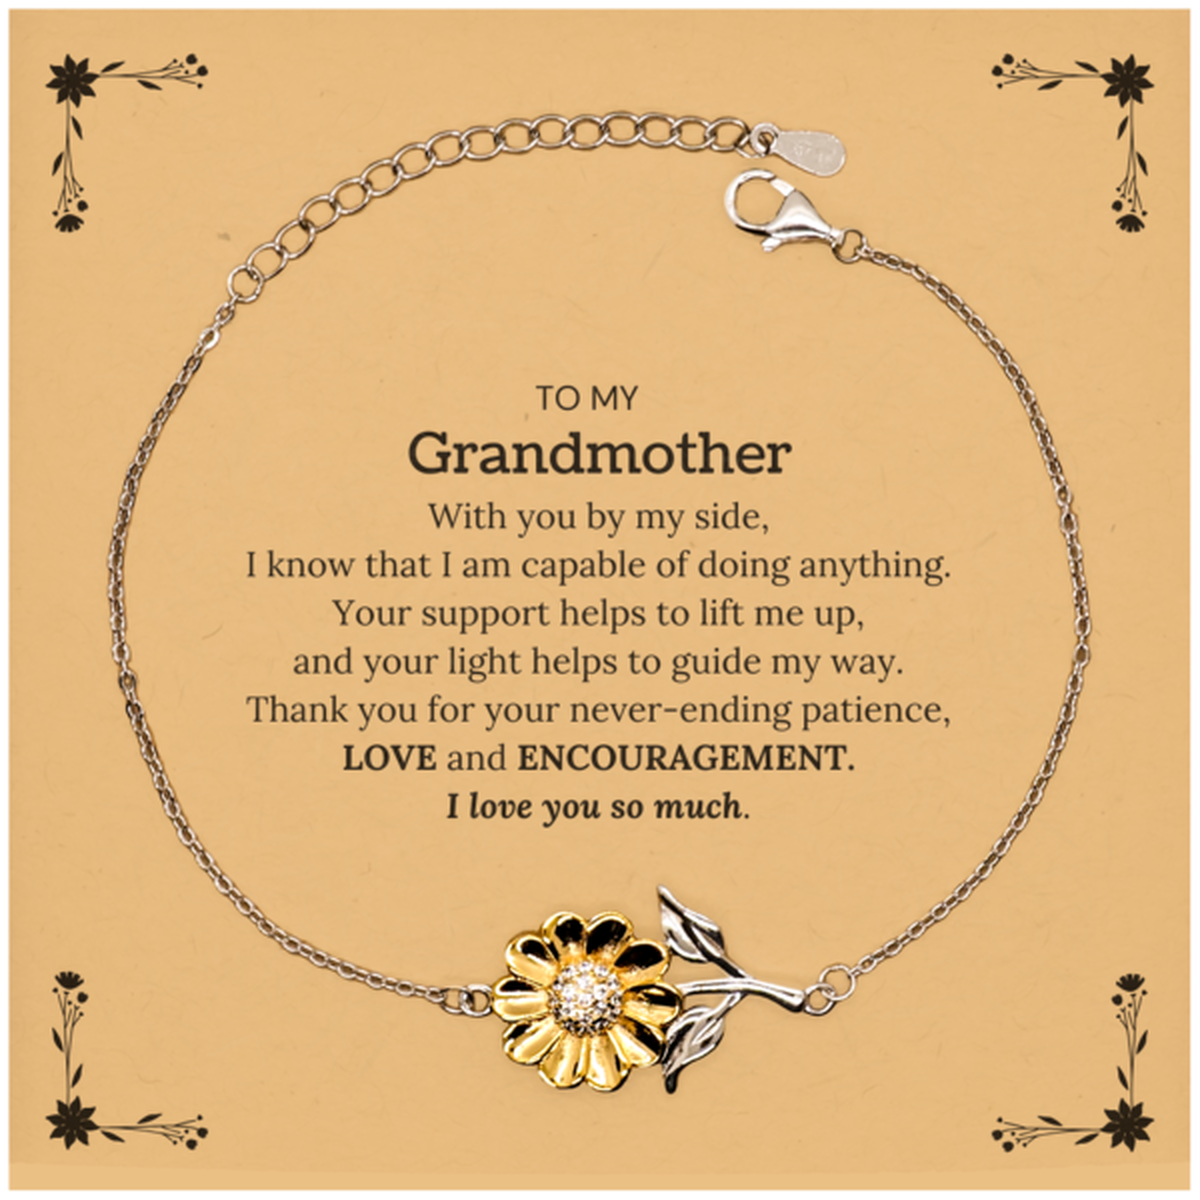 Appreciation Grandmother Sunflower Bracelet Gifts, To My Grandmother Birthday Christmas Wedding Keepsake Gifts for Grandmother With you by my side, I know that I am capable of doing anything. I love you so much